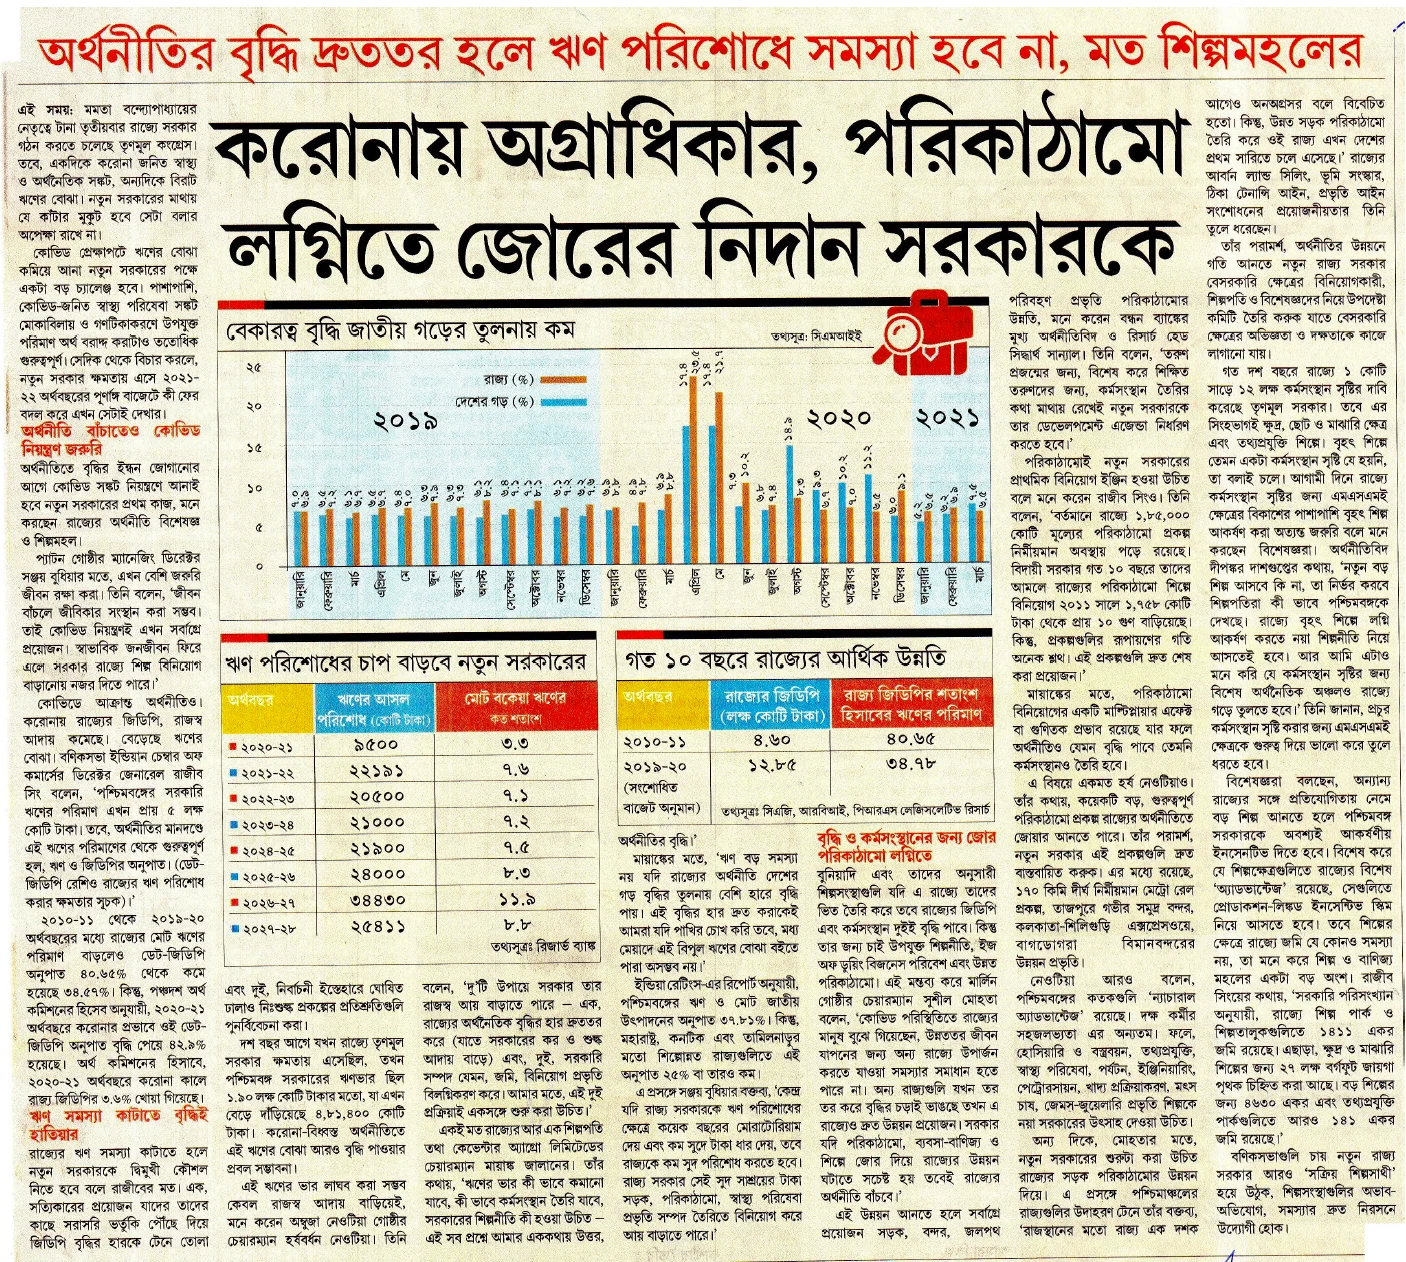 Infrastructure to be bossted by the govt for managing Corona – Ei Samay